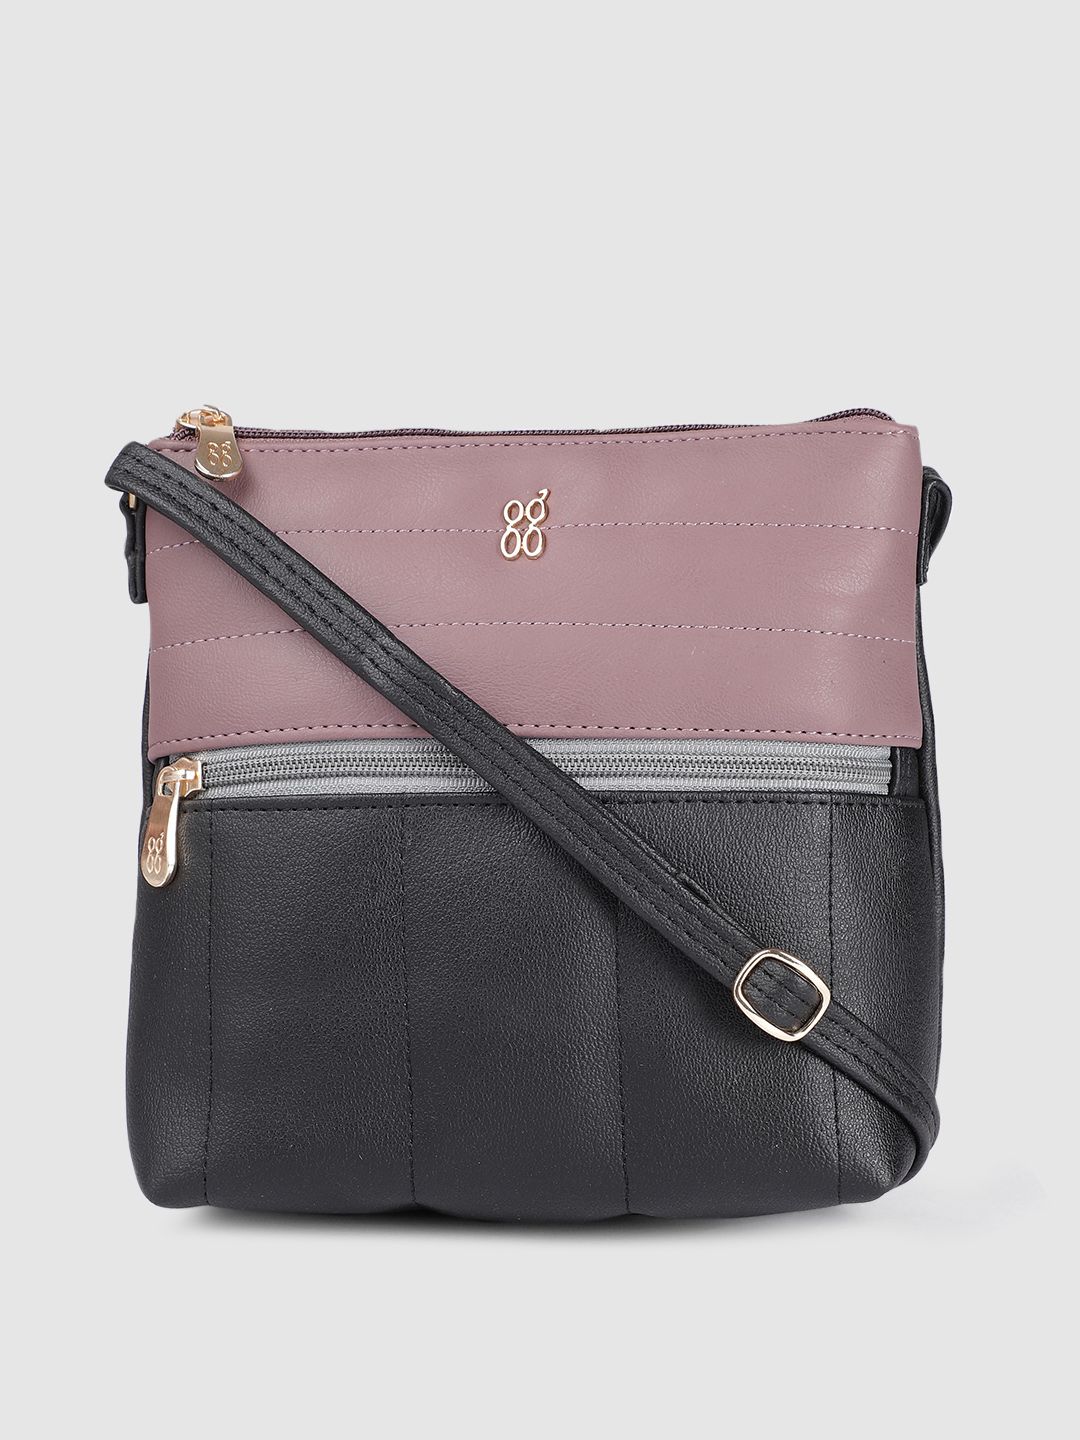 Baggit Black & Purple Colourblocked Structured Sling Bag Price in India